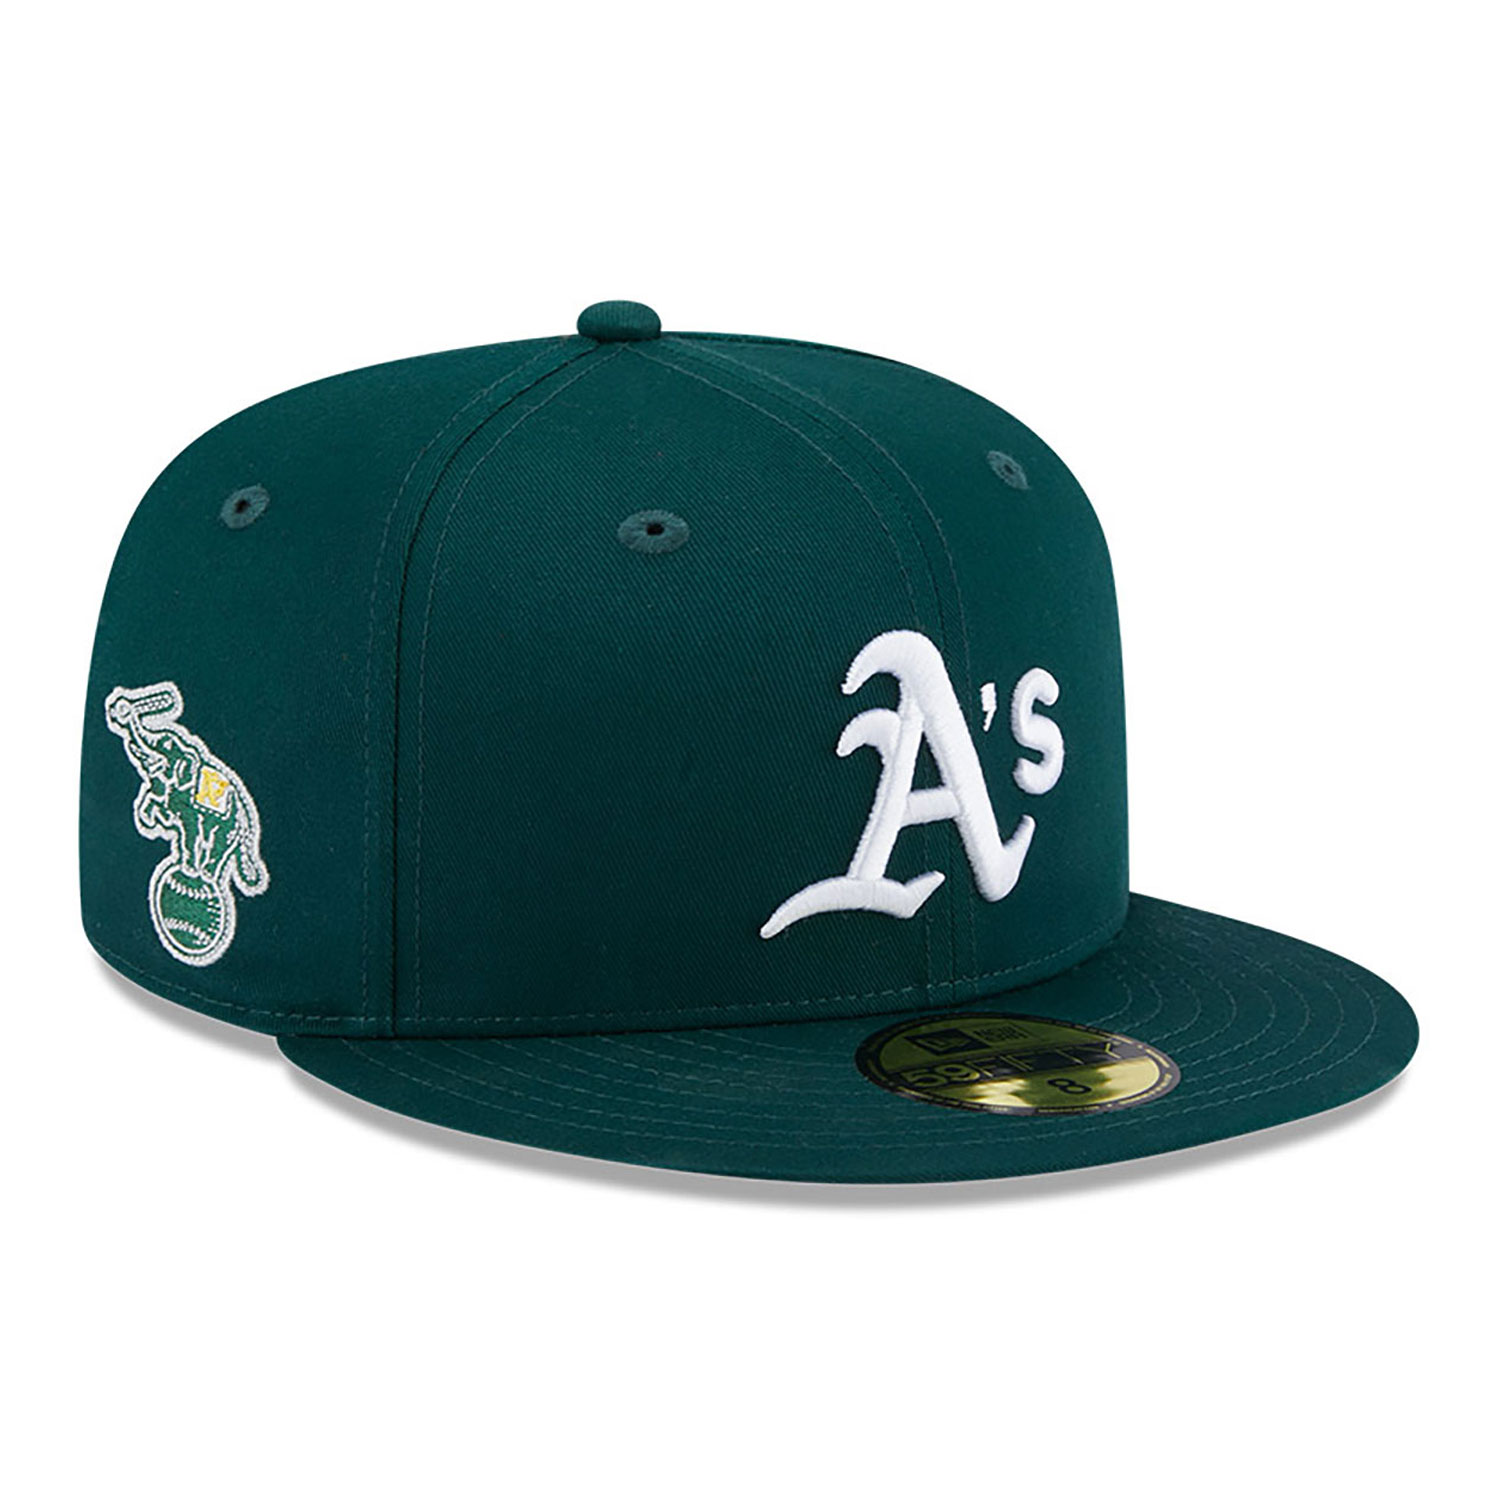 Oakland Athletics Team Side Patch Dark Green 59FIFTY Fitted Cap